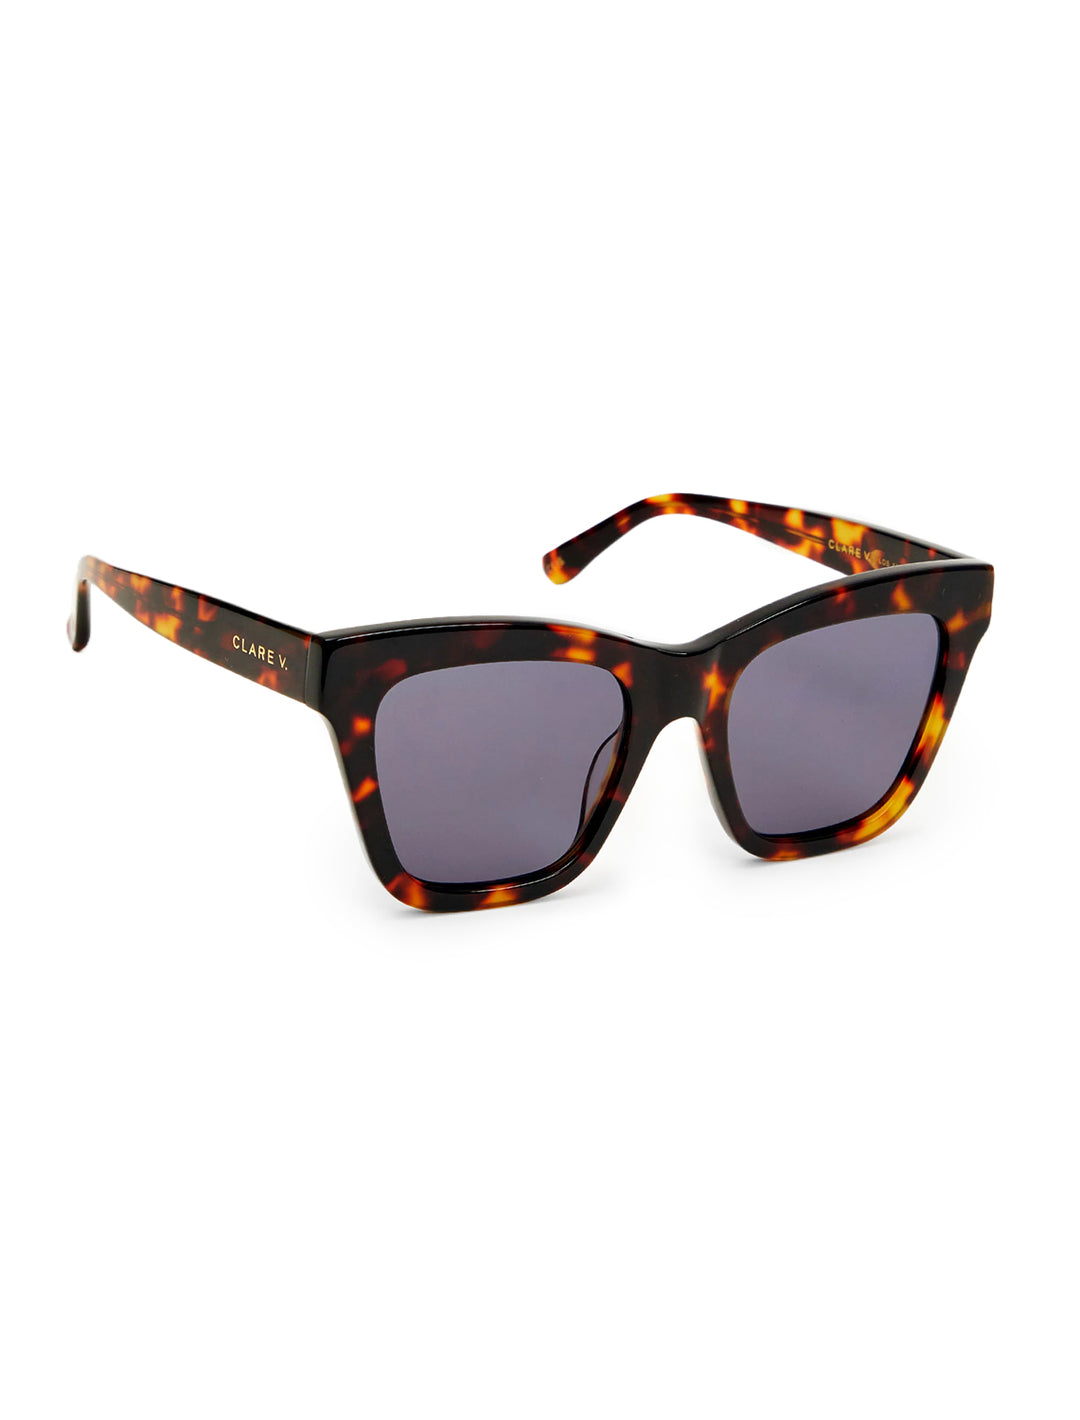 Side angle view of Clare V.'s heather sunglasses in tortoise.